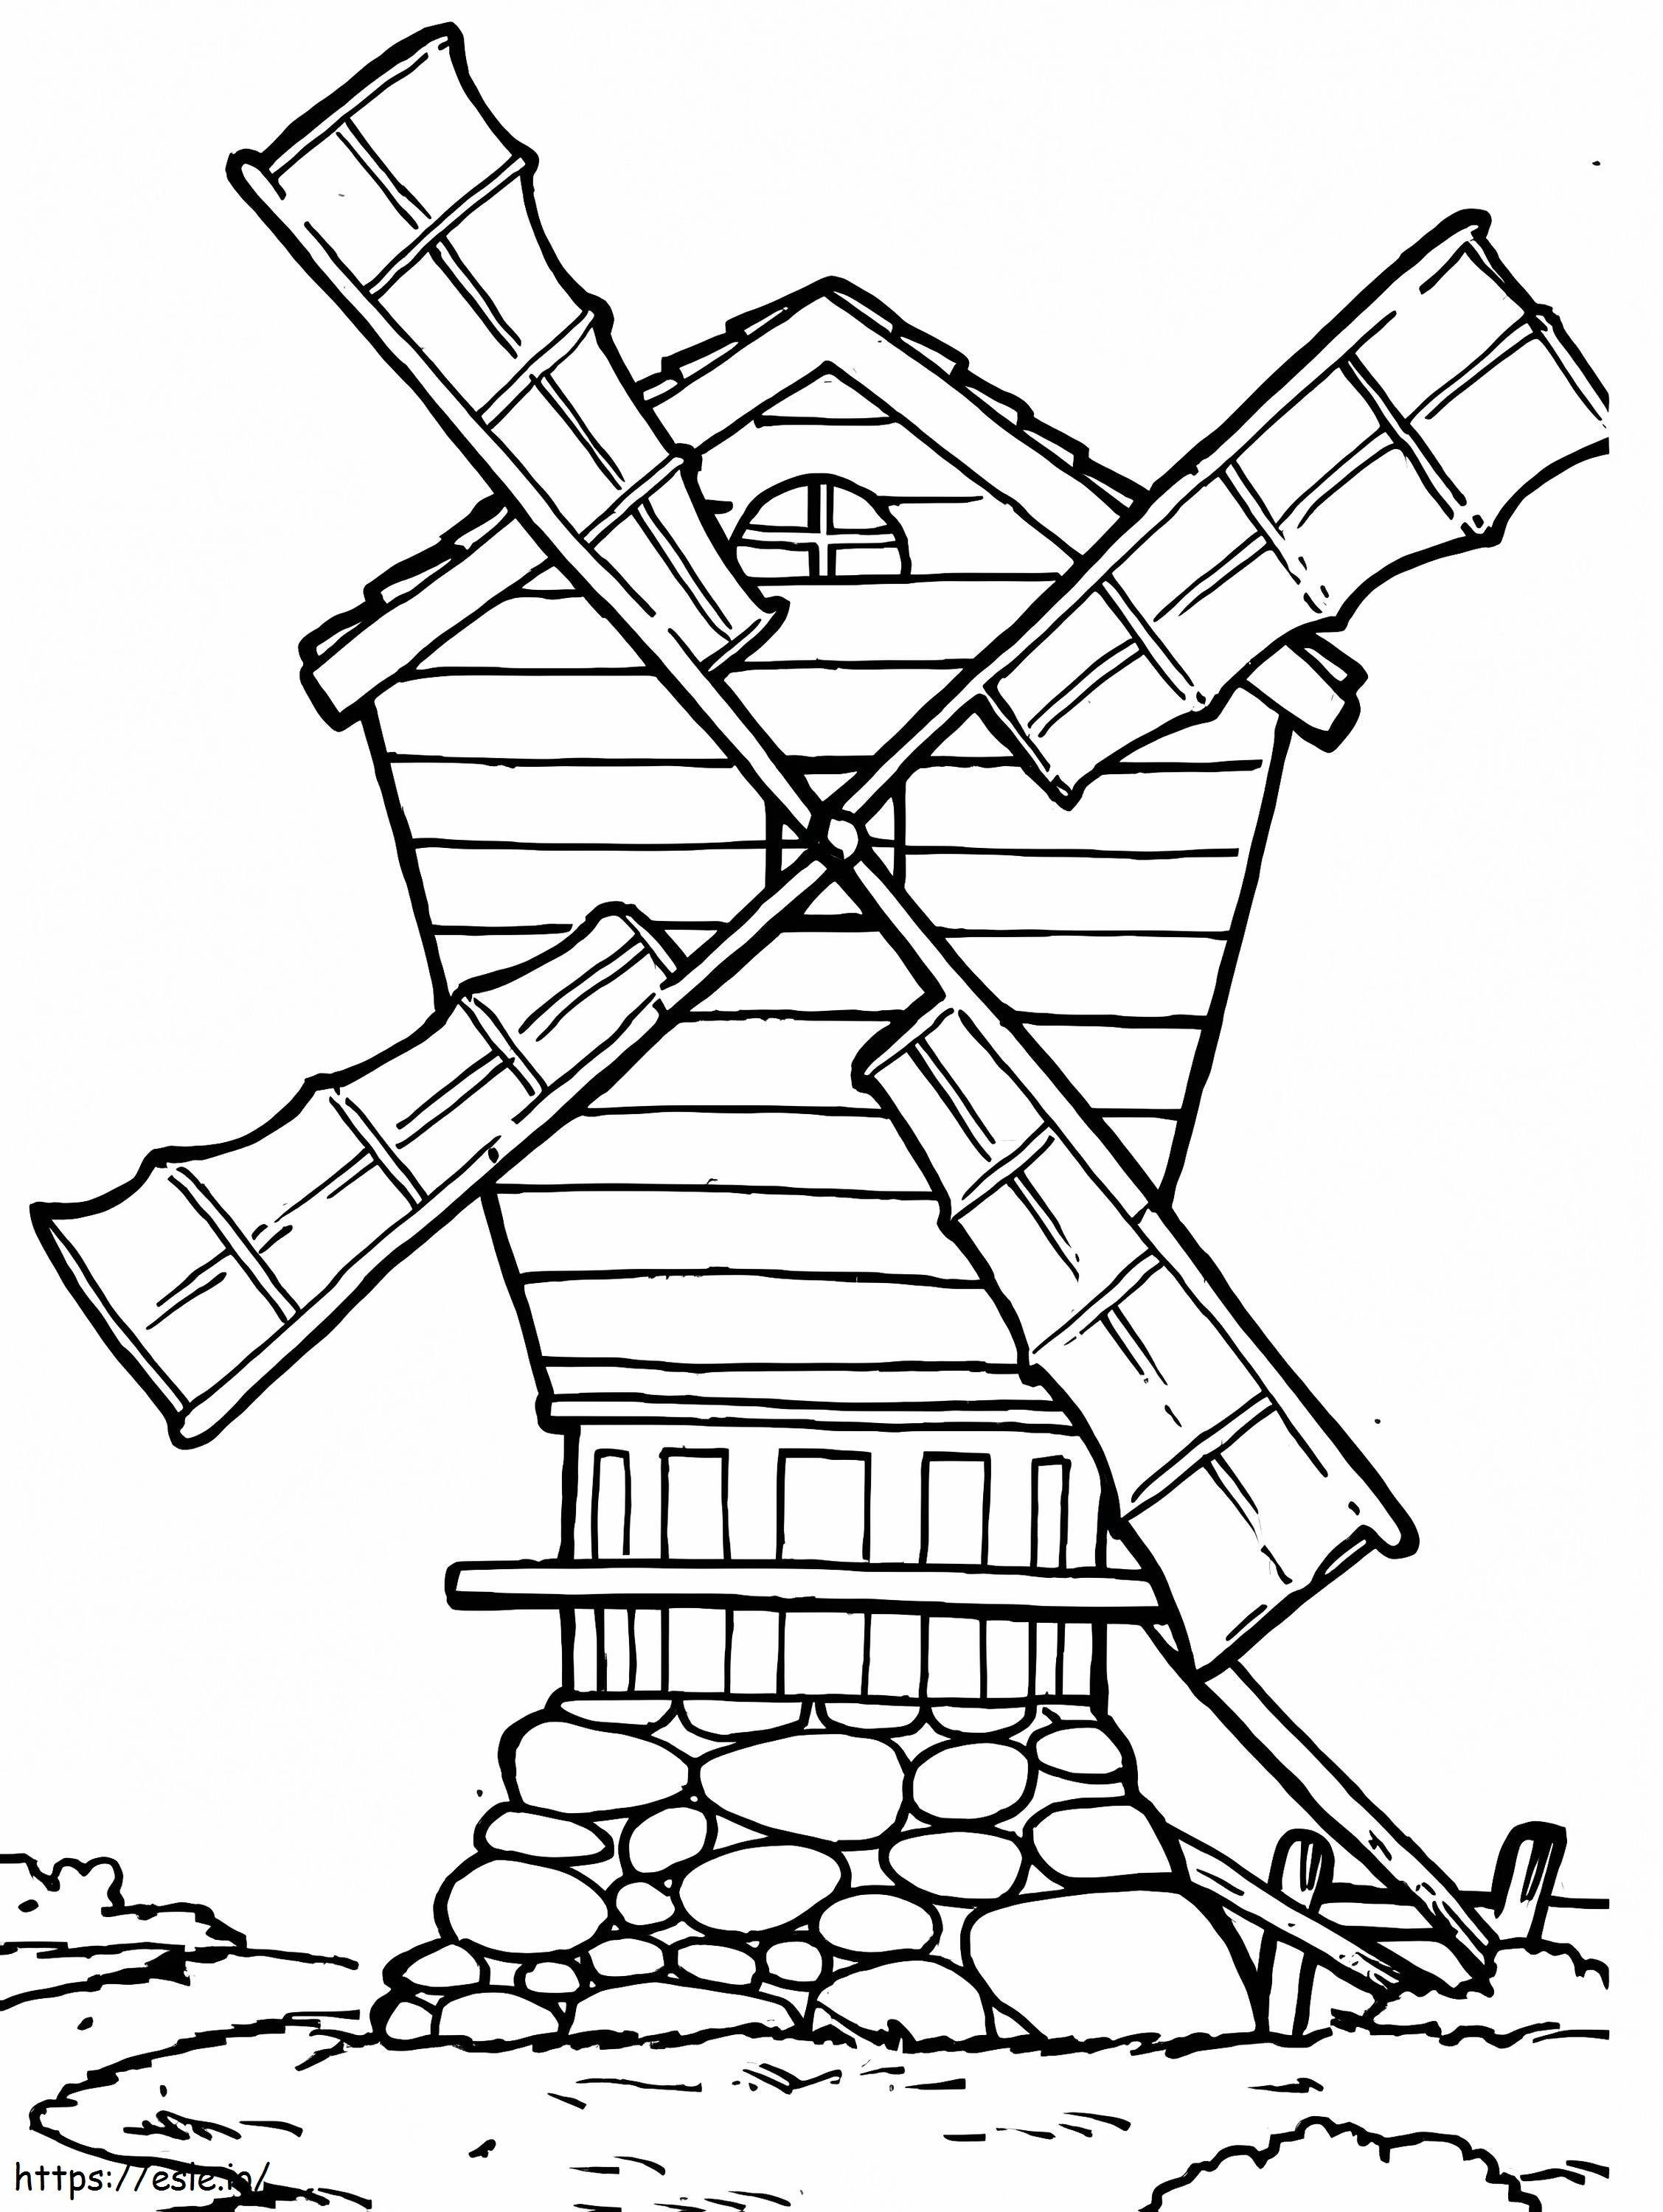 Old Windmill coloring page